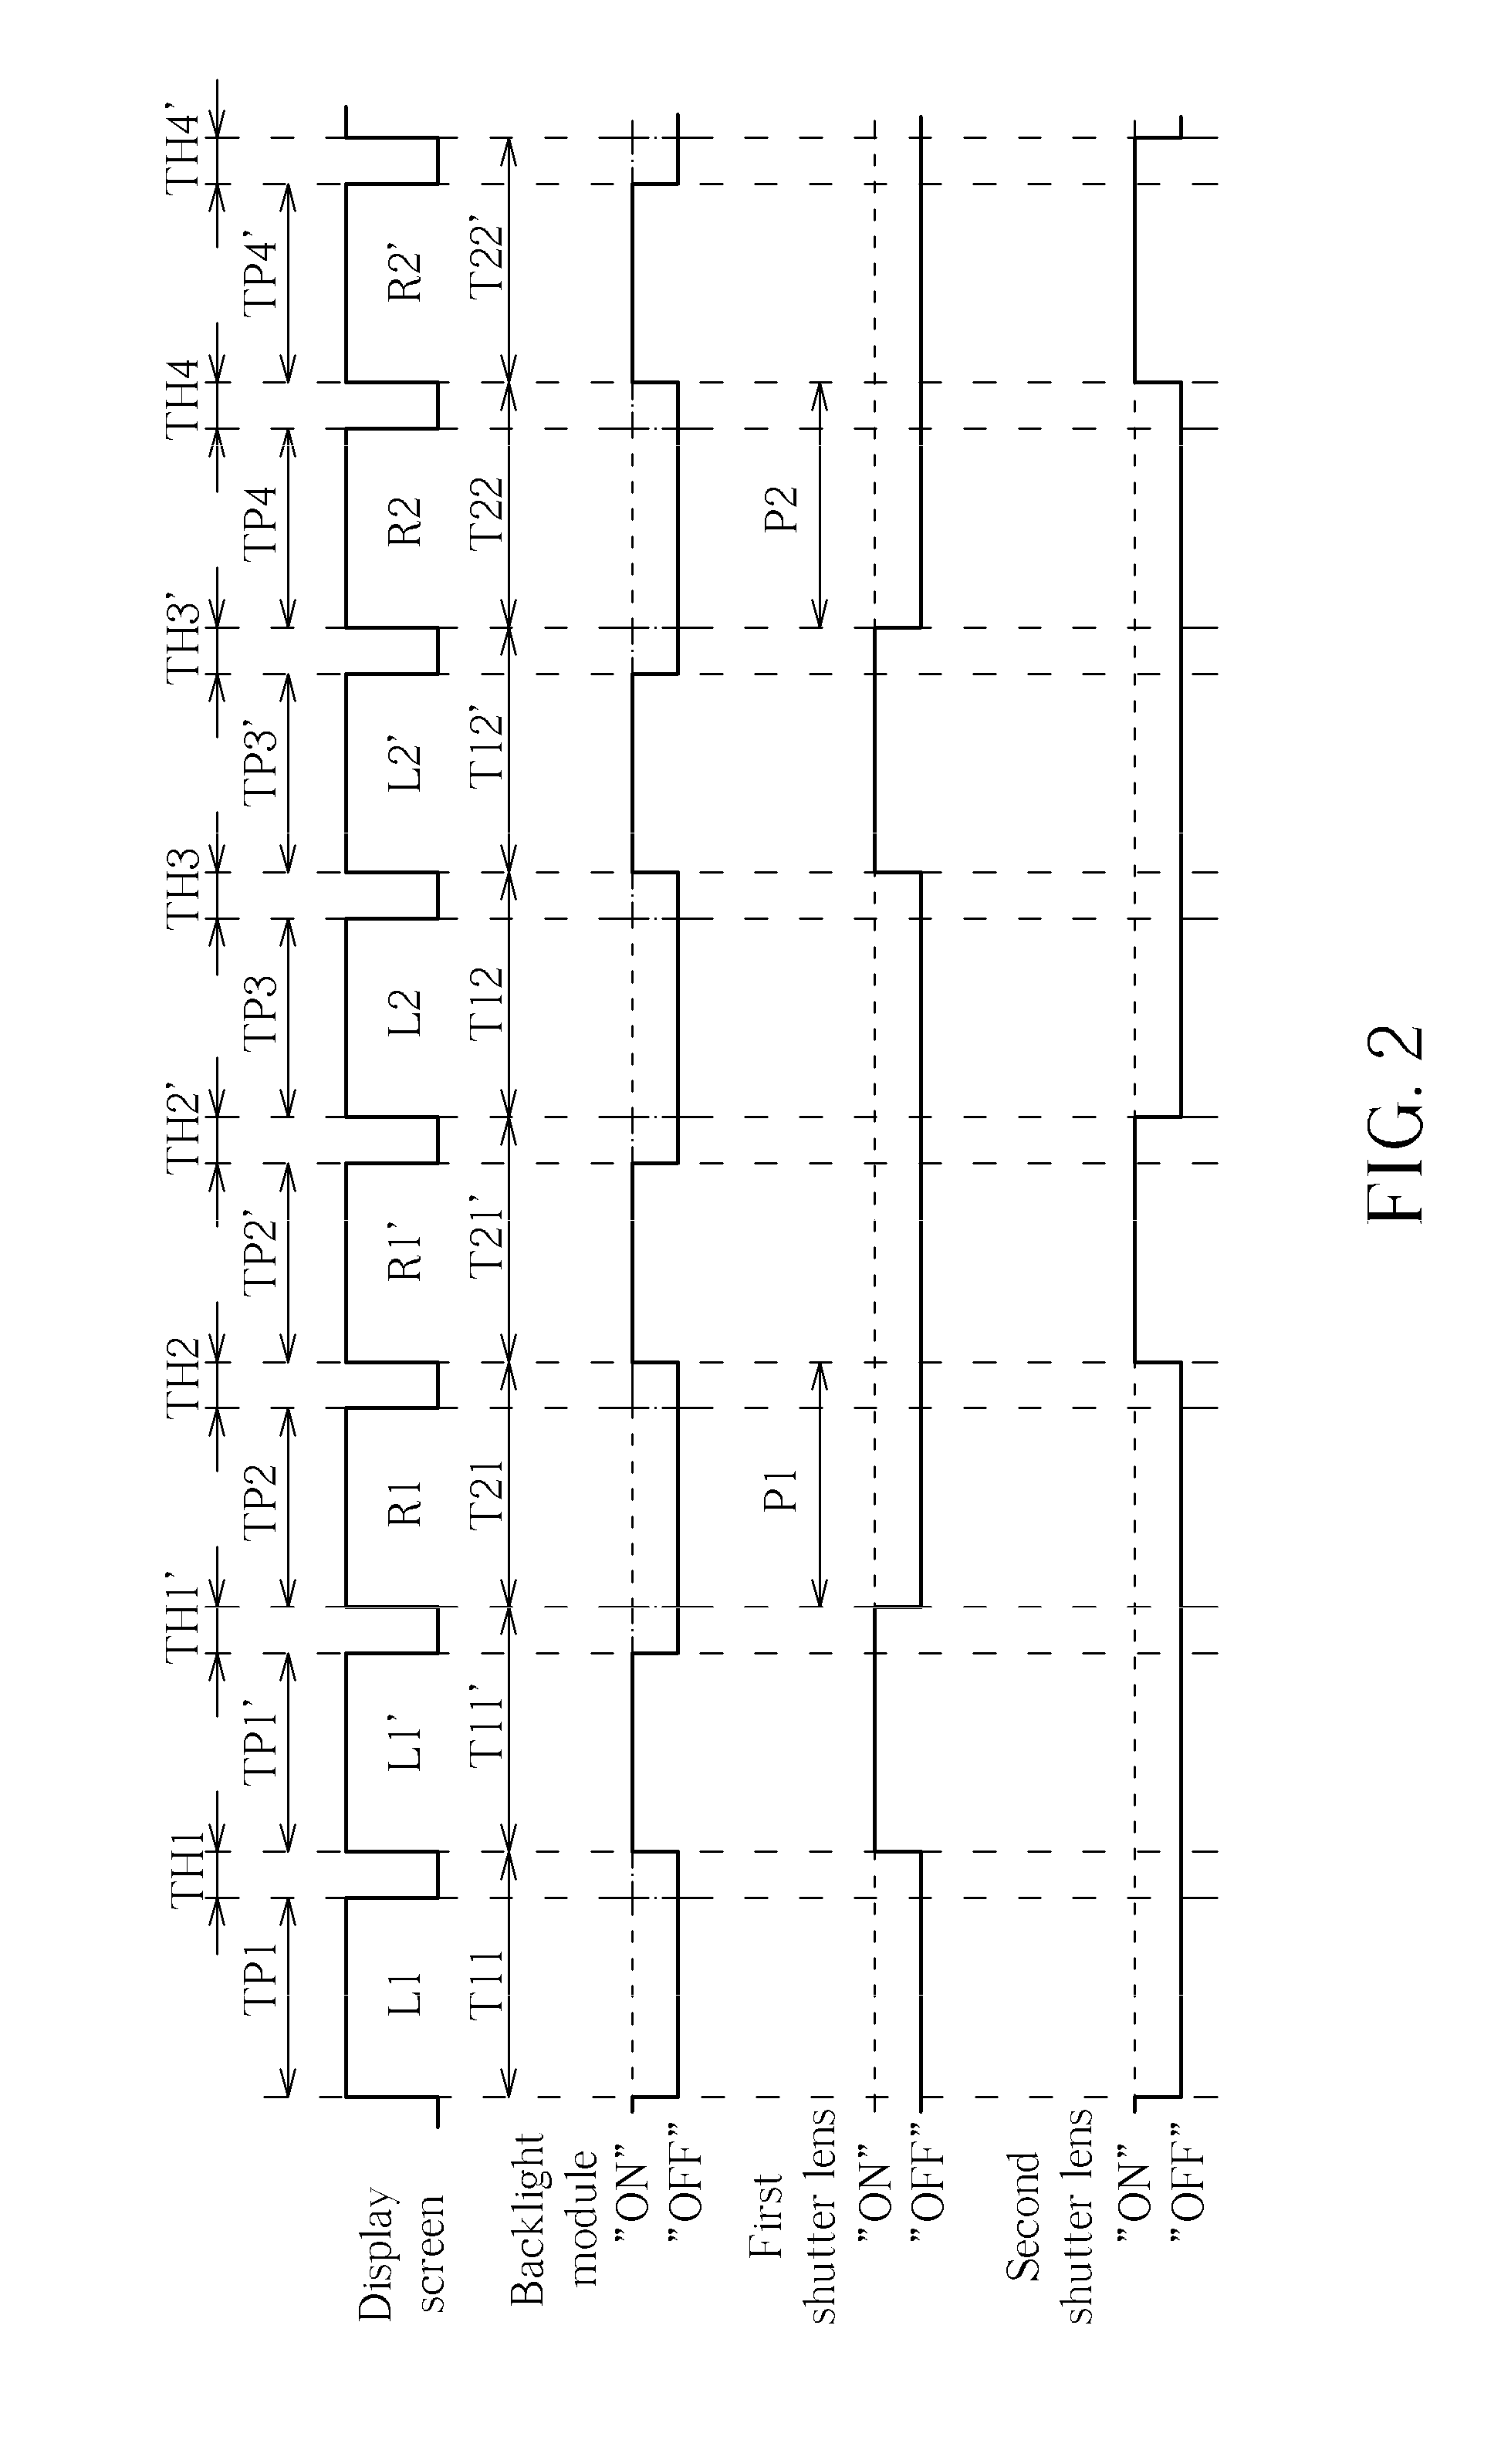 Shutter glasses and method for controlling a pair of shutter glasses